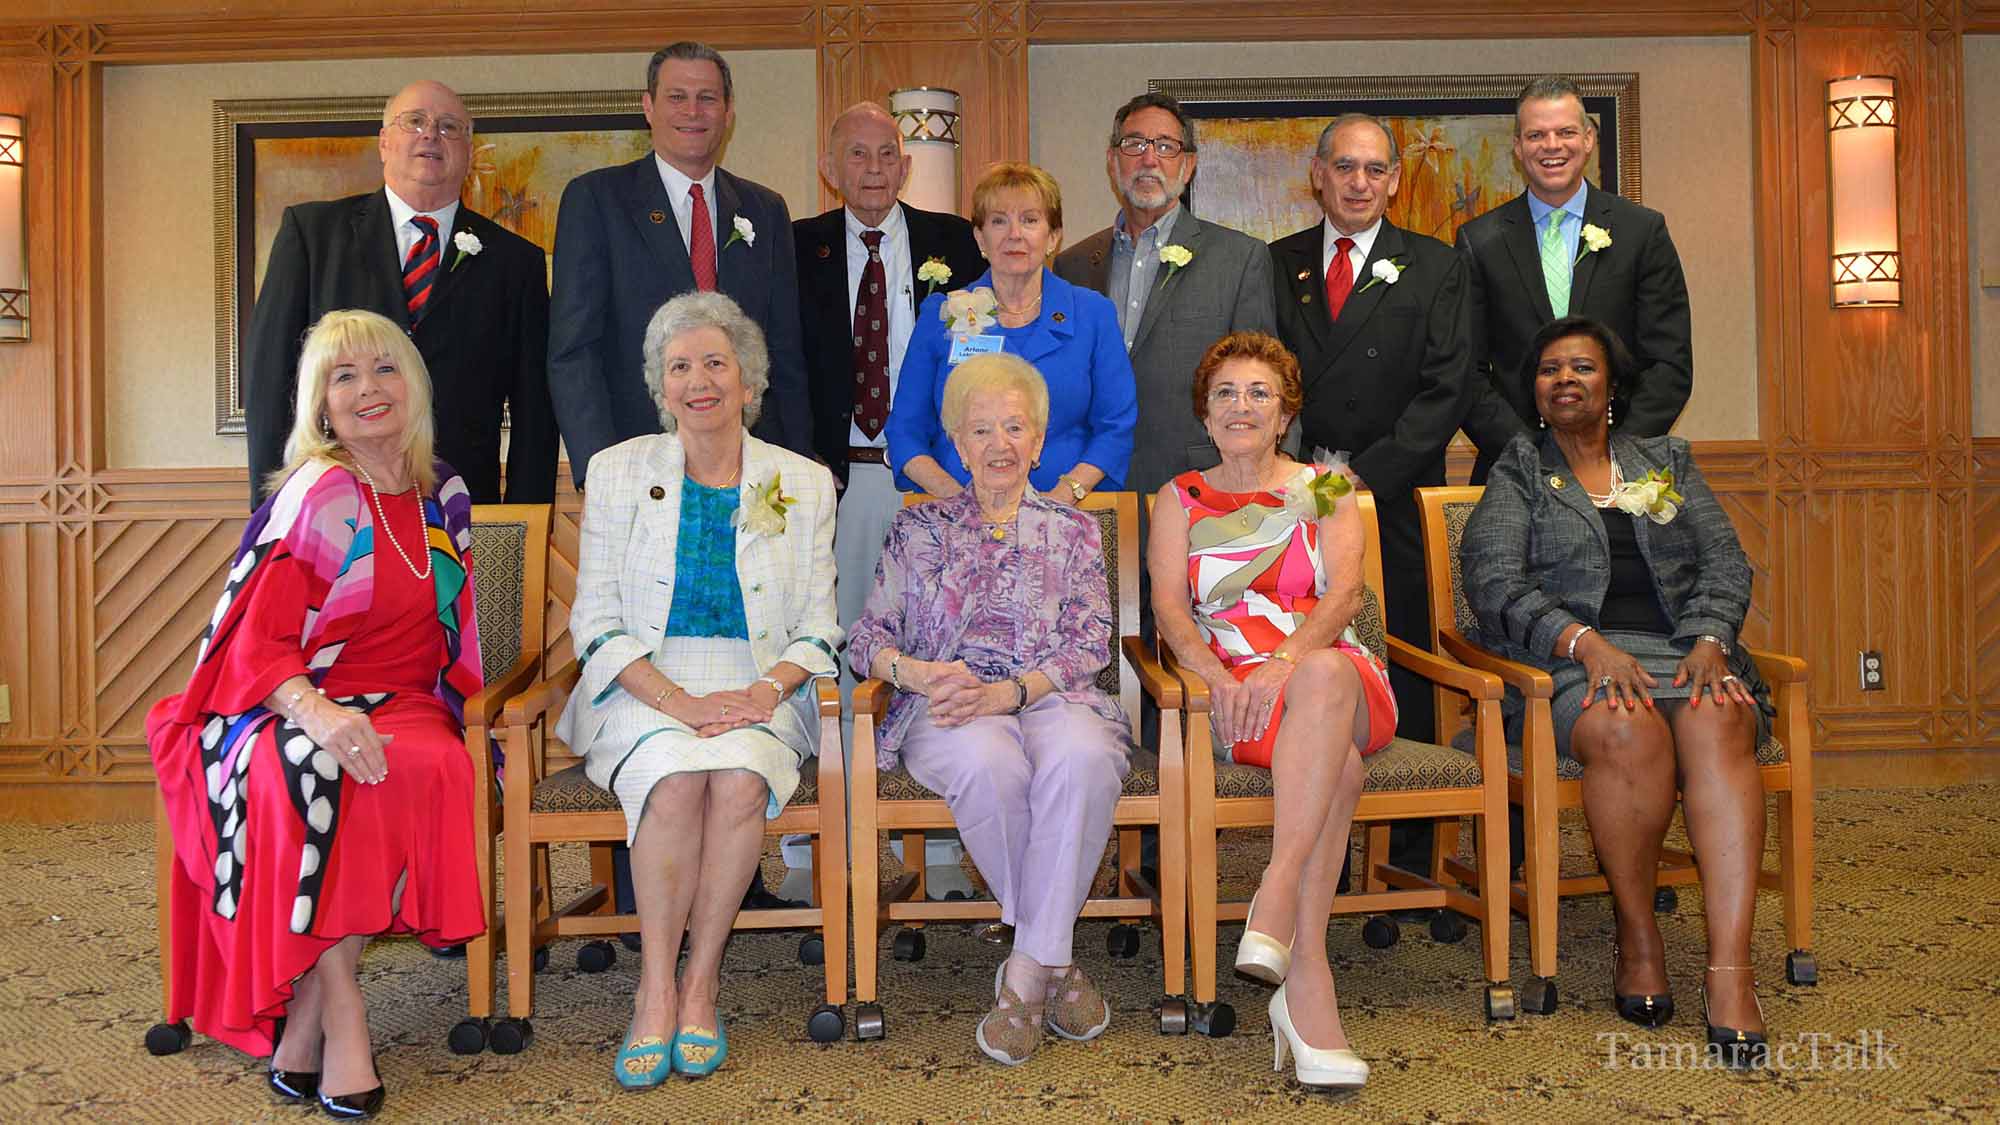 Ten Residents Are inducted into the Broward County Senior Hall of Fame